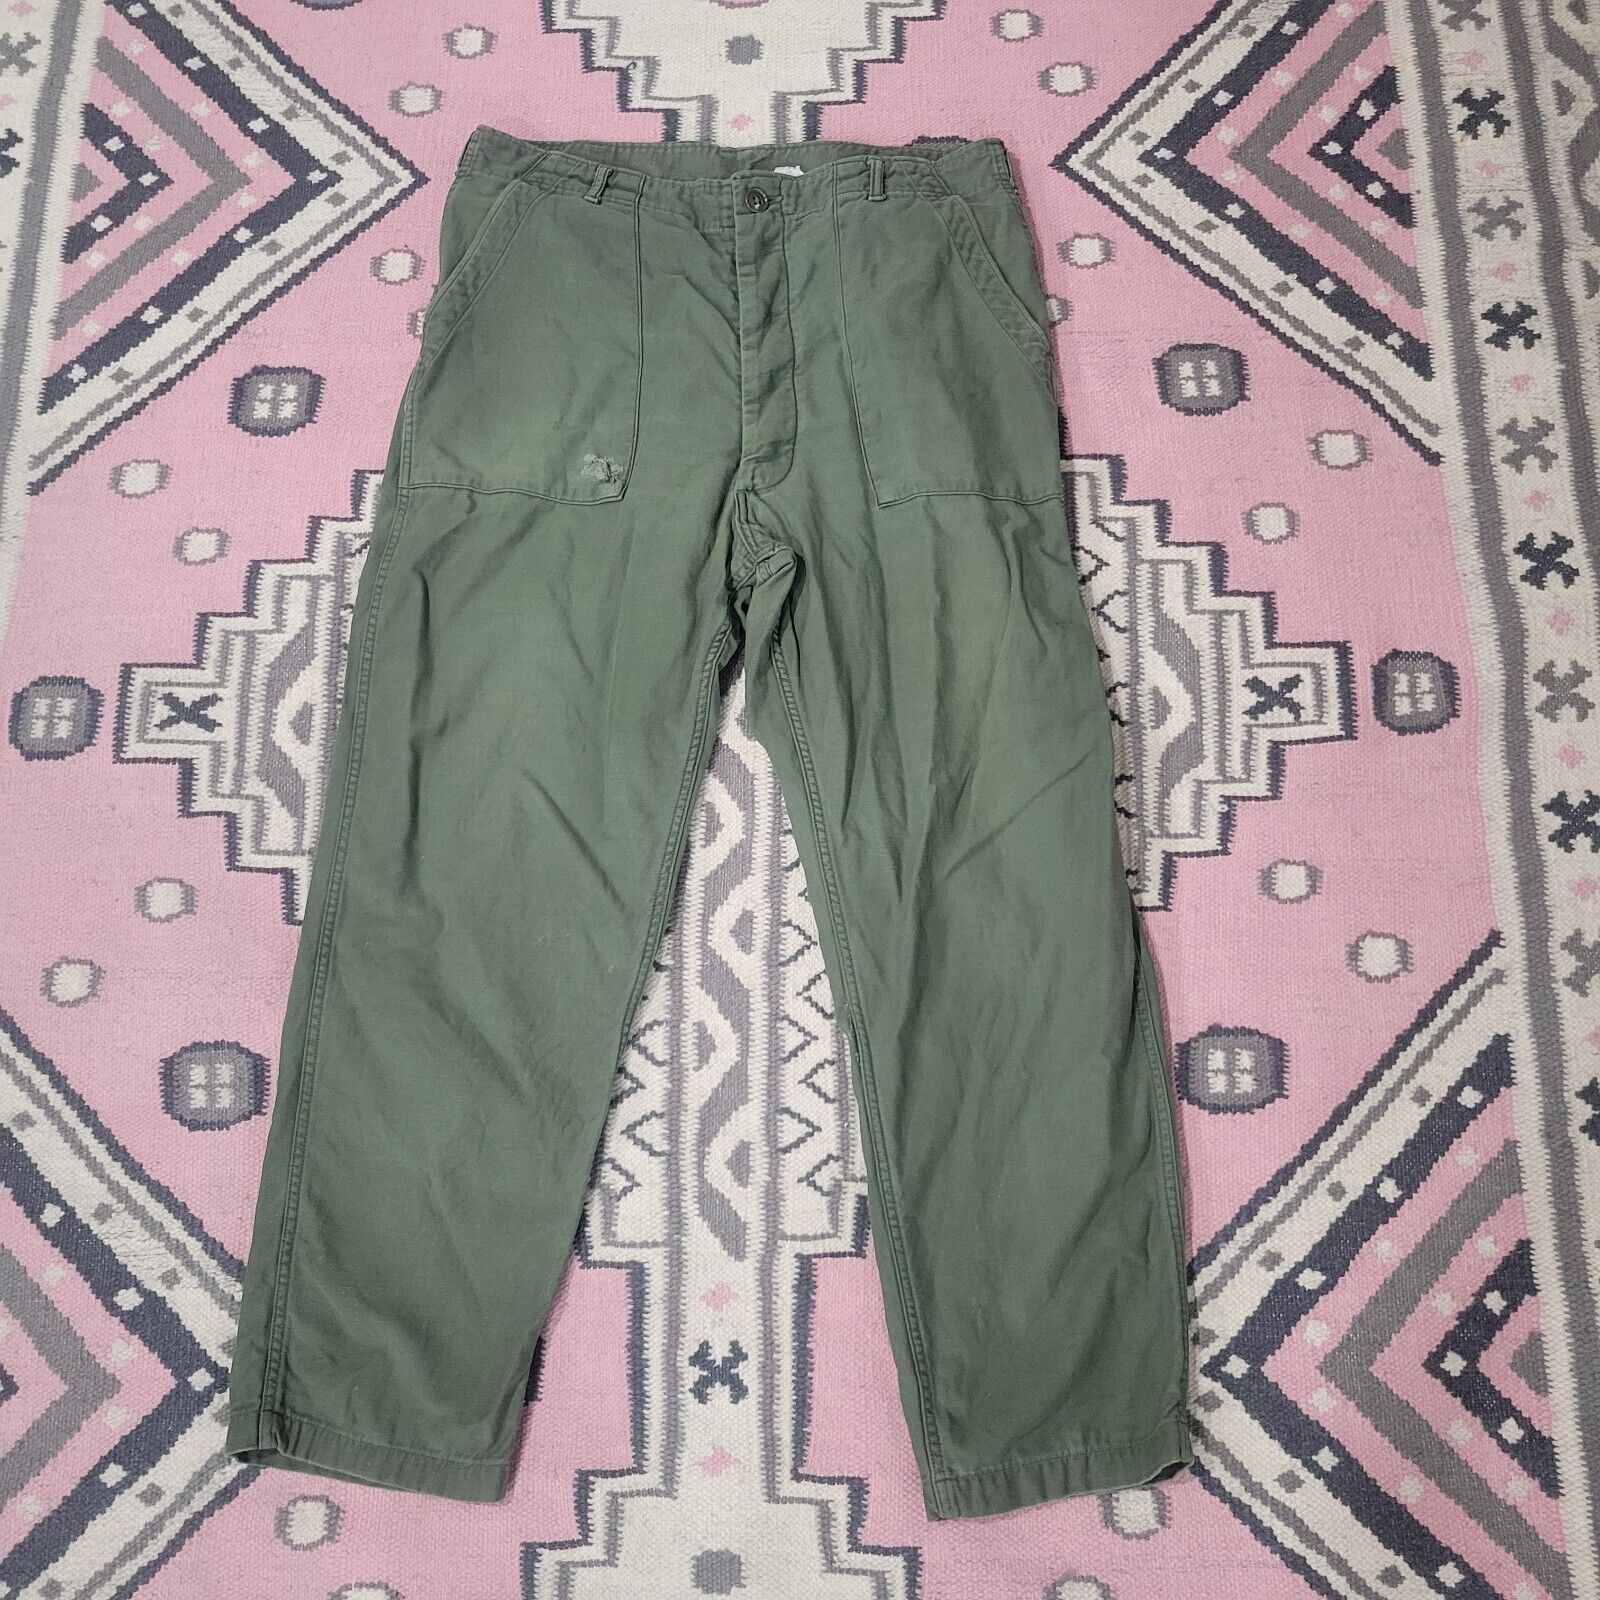 Vintage Military Pants 1970s OG107 Sateen 40x31 Trousers Utility Fit 38 X 30